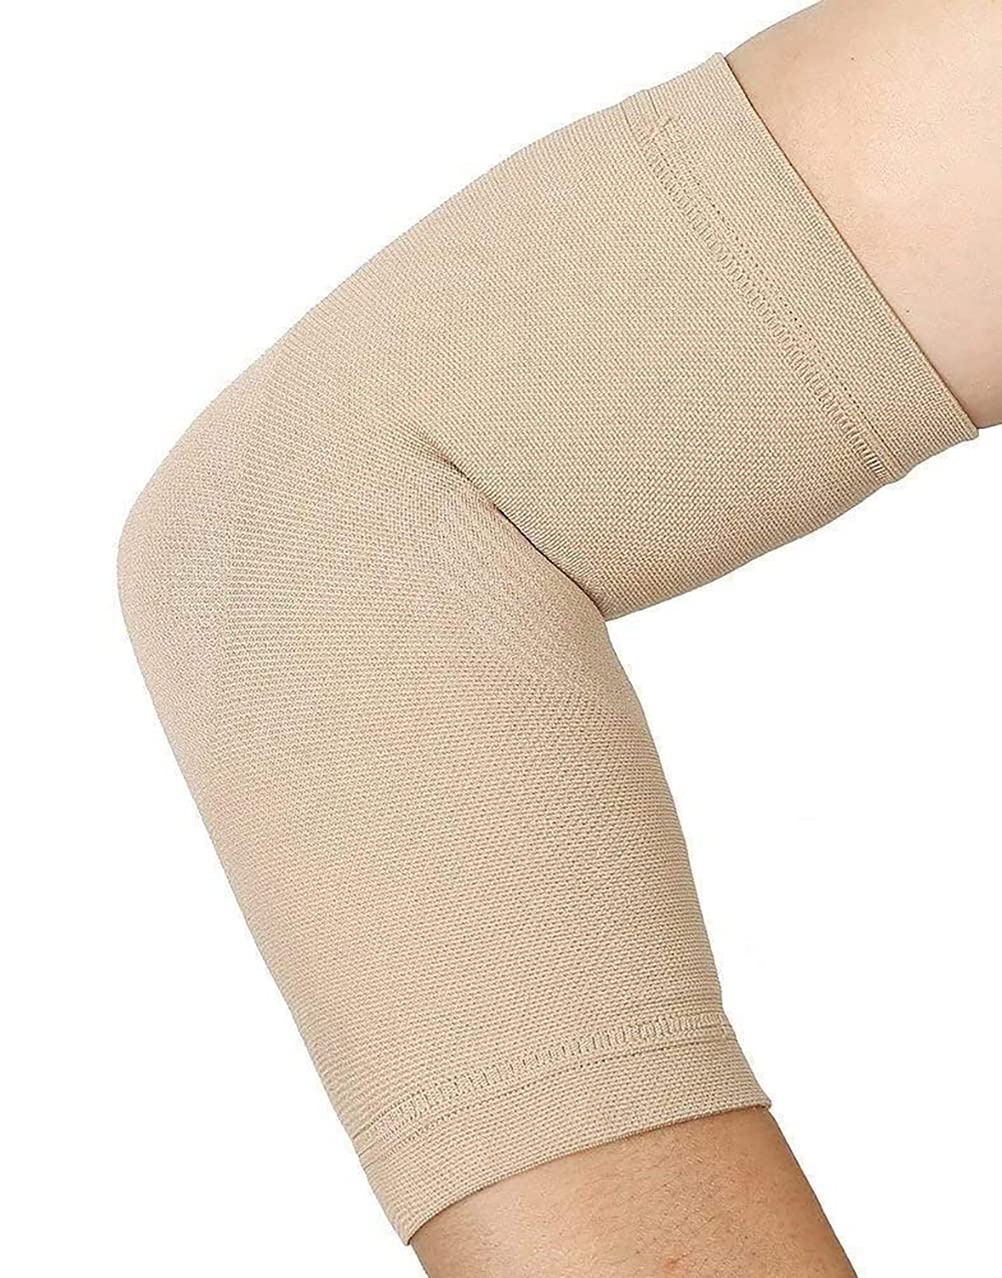 [Australia] - Elbow Compression Sleeves, 20-30mmHg Strong Support, 1 Pair Unisex, Lightweight Elbow Brace for Recovery, Arthritis & Tendonitis Joint Pain Relief, Support for Tennis Elbow & Golfers Brace, Beige S Small: 6" - 7" Elbow Circumference 